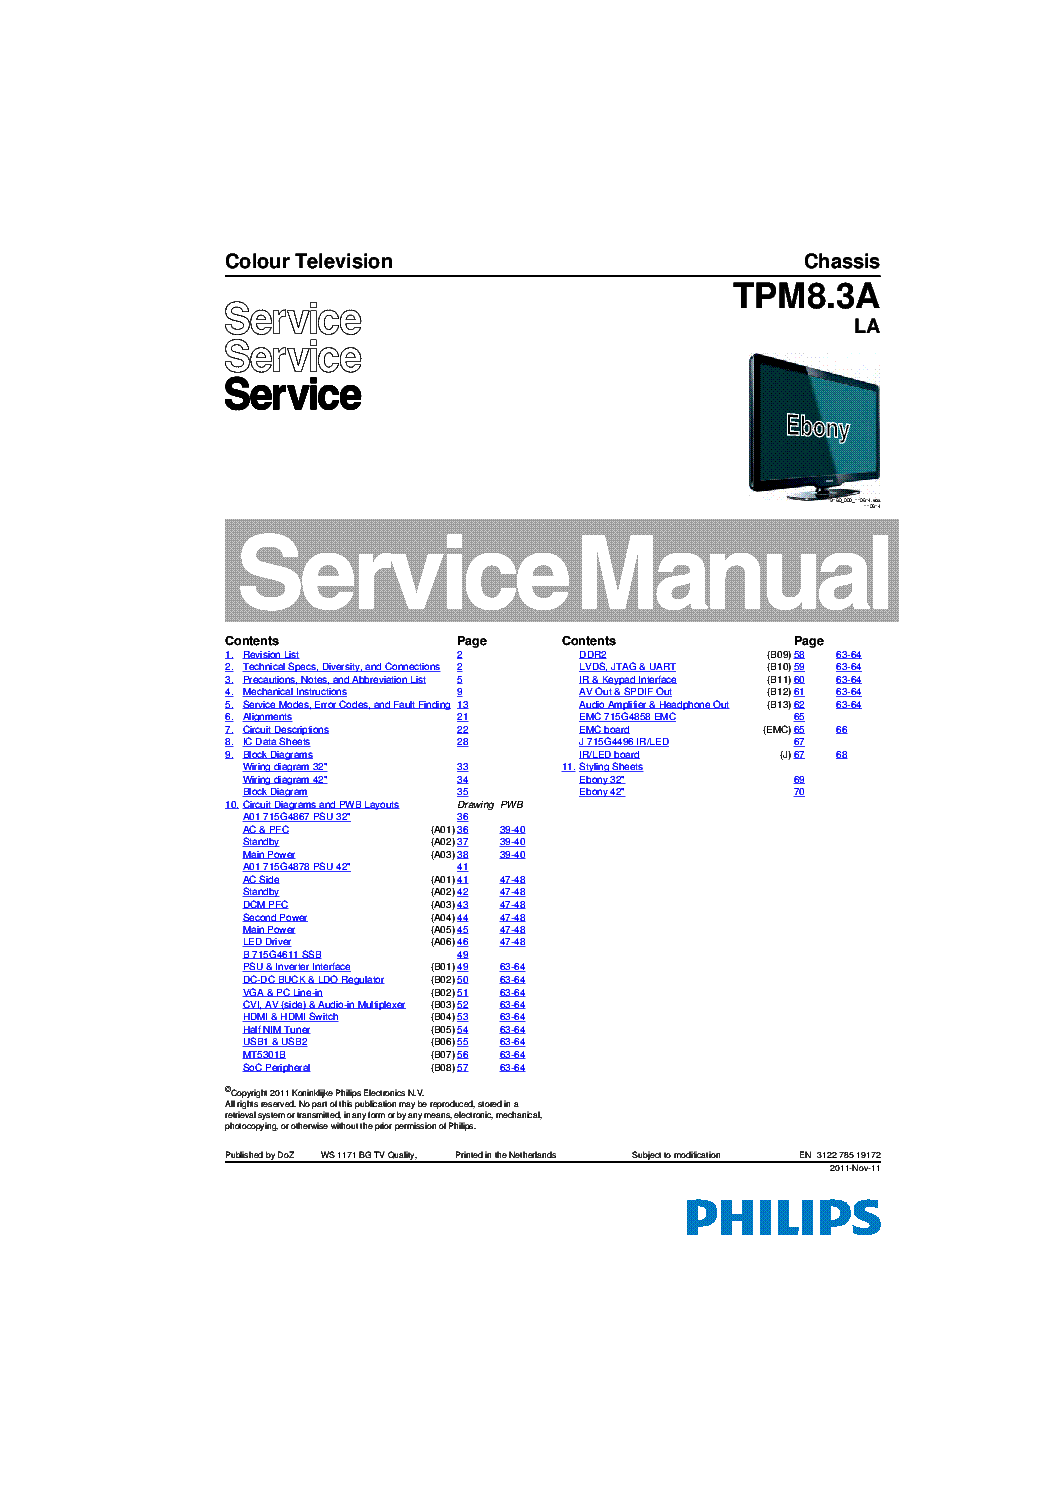 PHILIPS 32PFL5606S 98 CHASSIS TPM8.3A LA SM service manual (1st page)